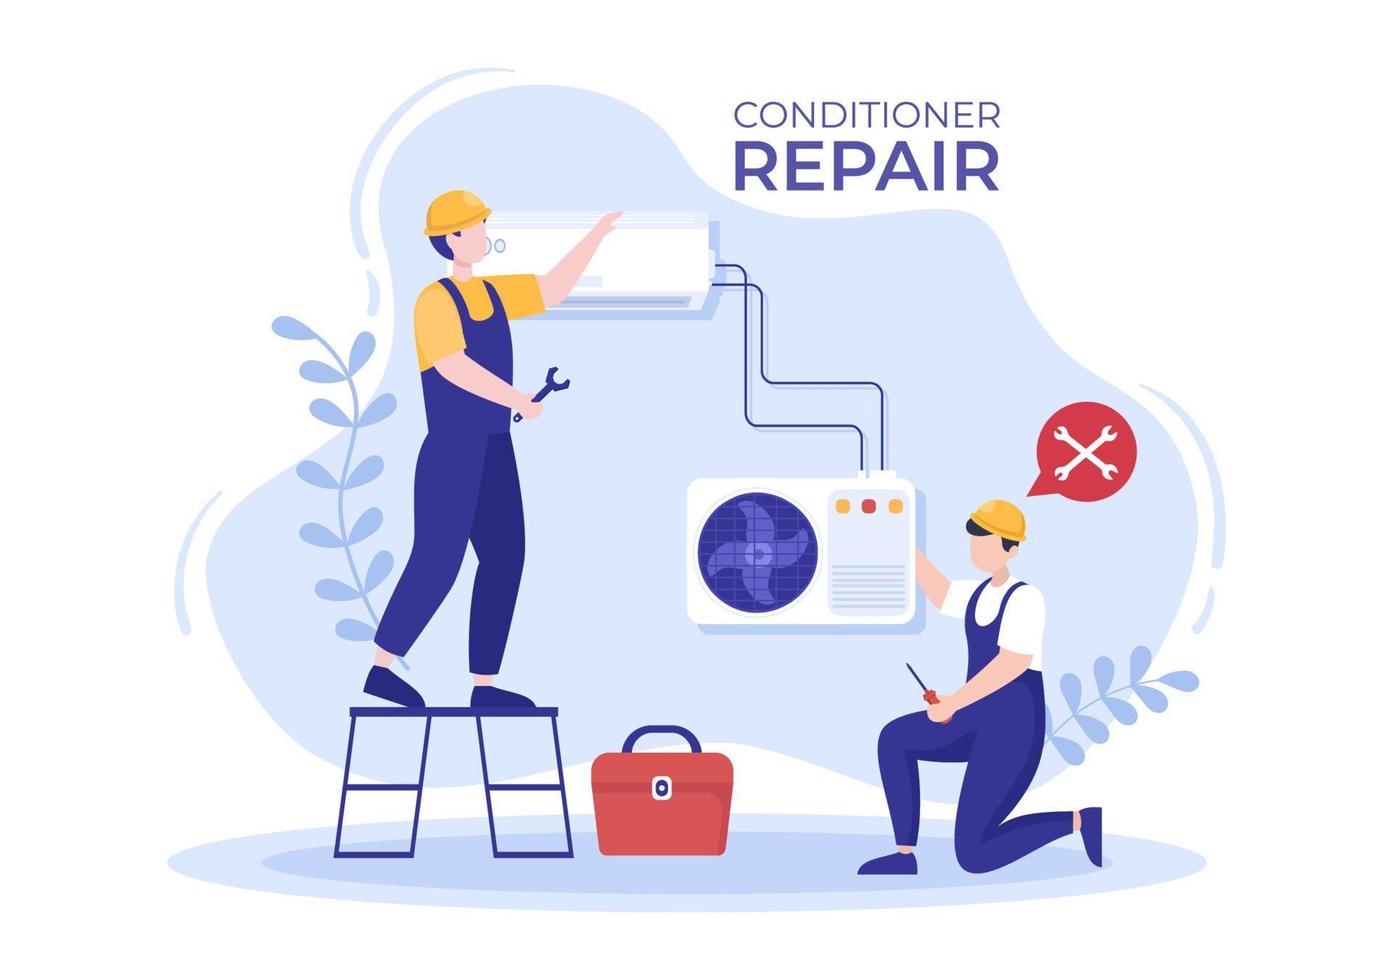 Air Conditioner Repair or Installation Illustration with Unit Breakdown, Maintenance Service, Cooling System in Flat Style Cartoon Concept vector